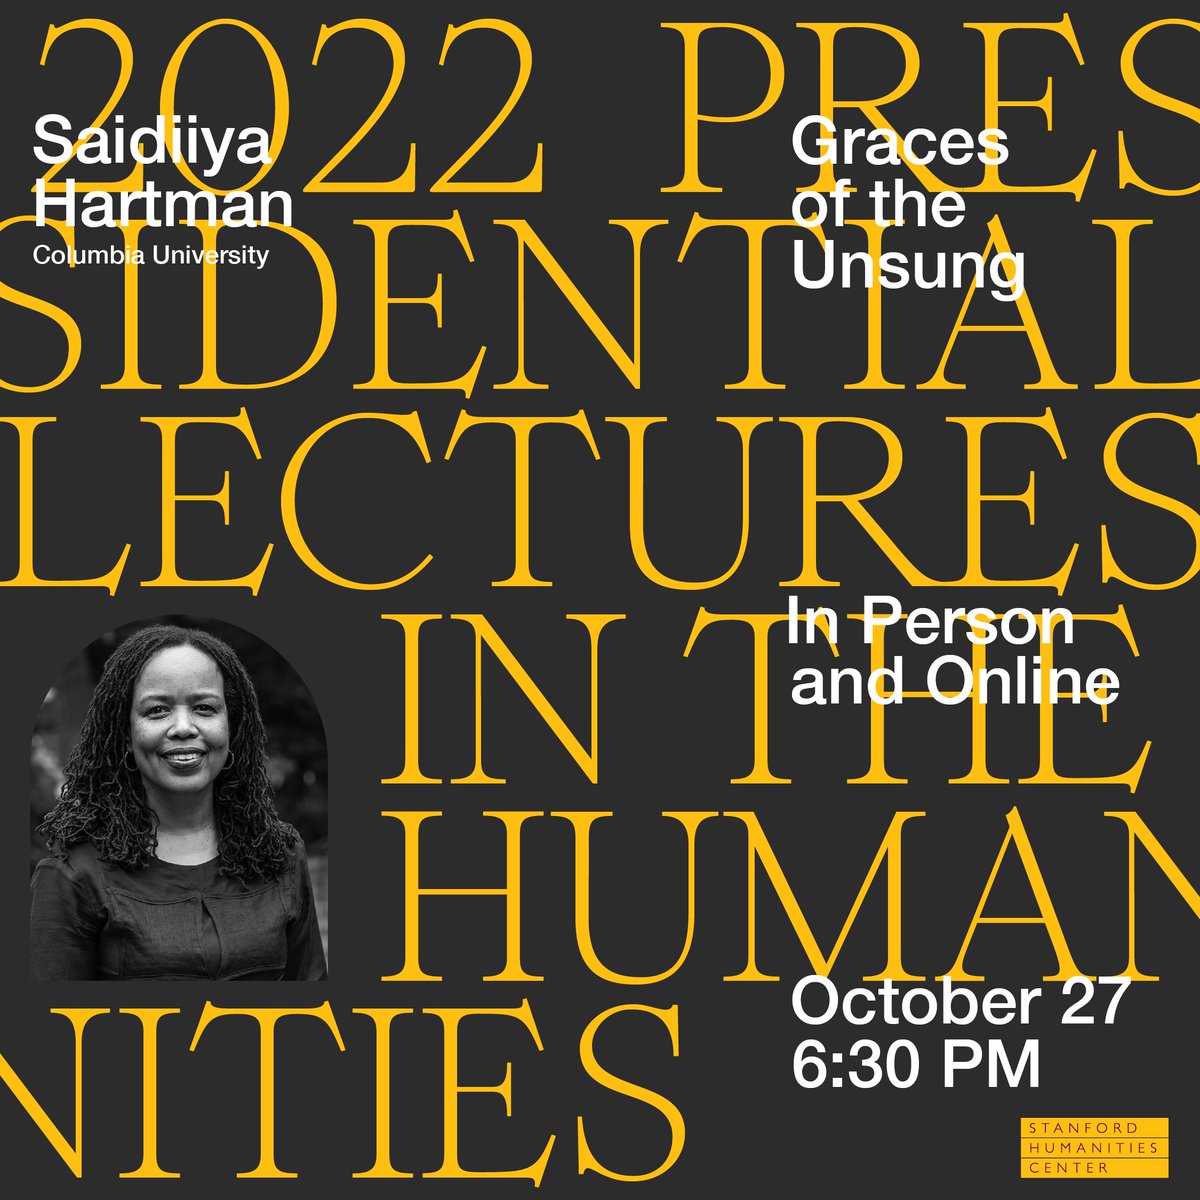 Happening next week 📢 Join us for the 2022 Presidential Lecture with Saidiya Hartman -- 10/27 @ 6:30pm -- in person or online. 🔗 shc.stanford.edu/events